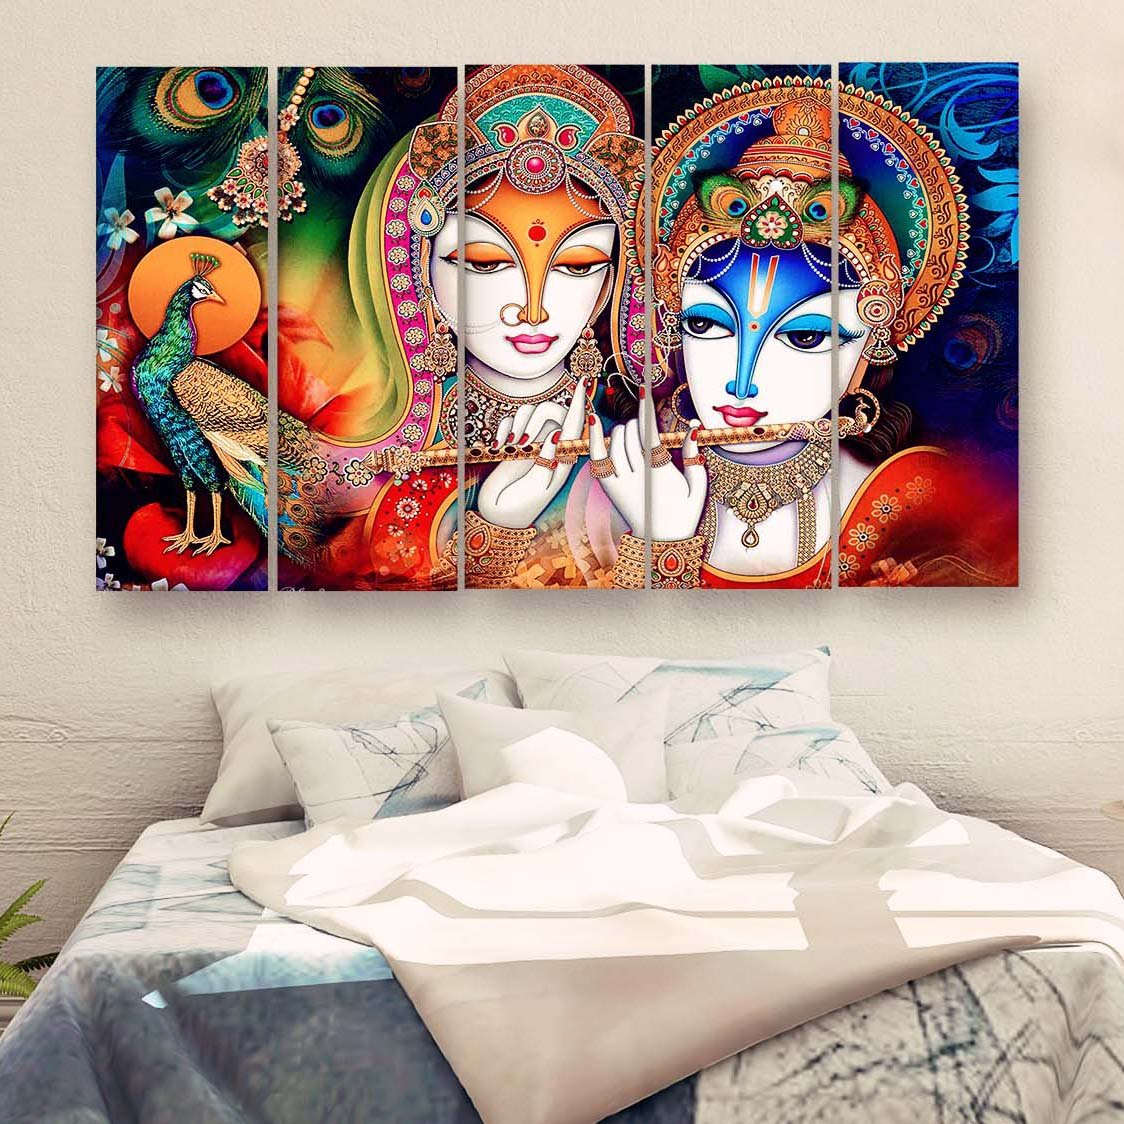 Casperme Radha Krishna Wall Painting For Living Room for Bedroom, Hotels & Office Decoration (48×30 inhes)